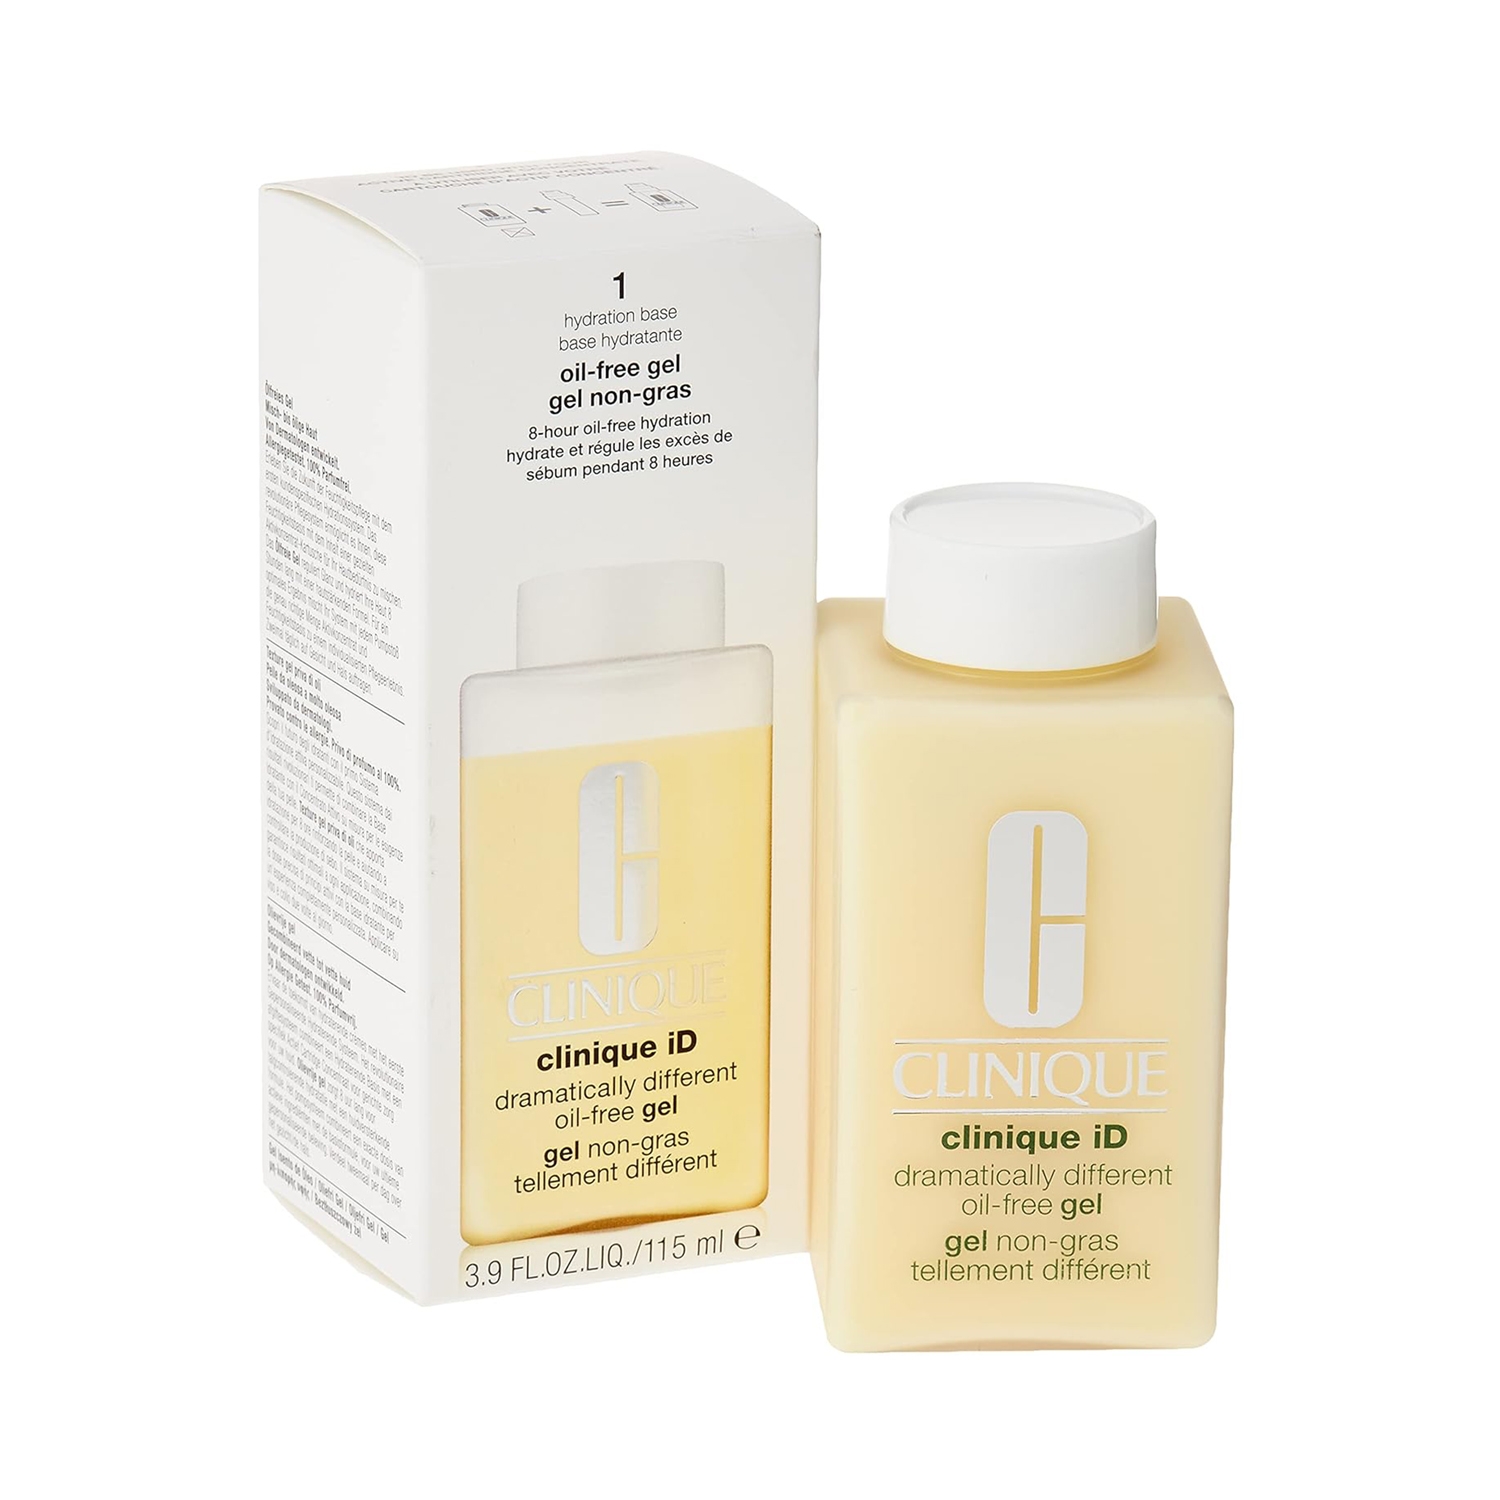 CLINIQUE | CLINIQUE ID Dramatically Different Oil-Free Gel (115ml)